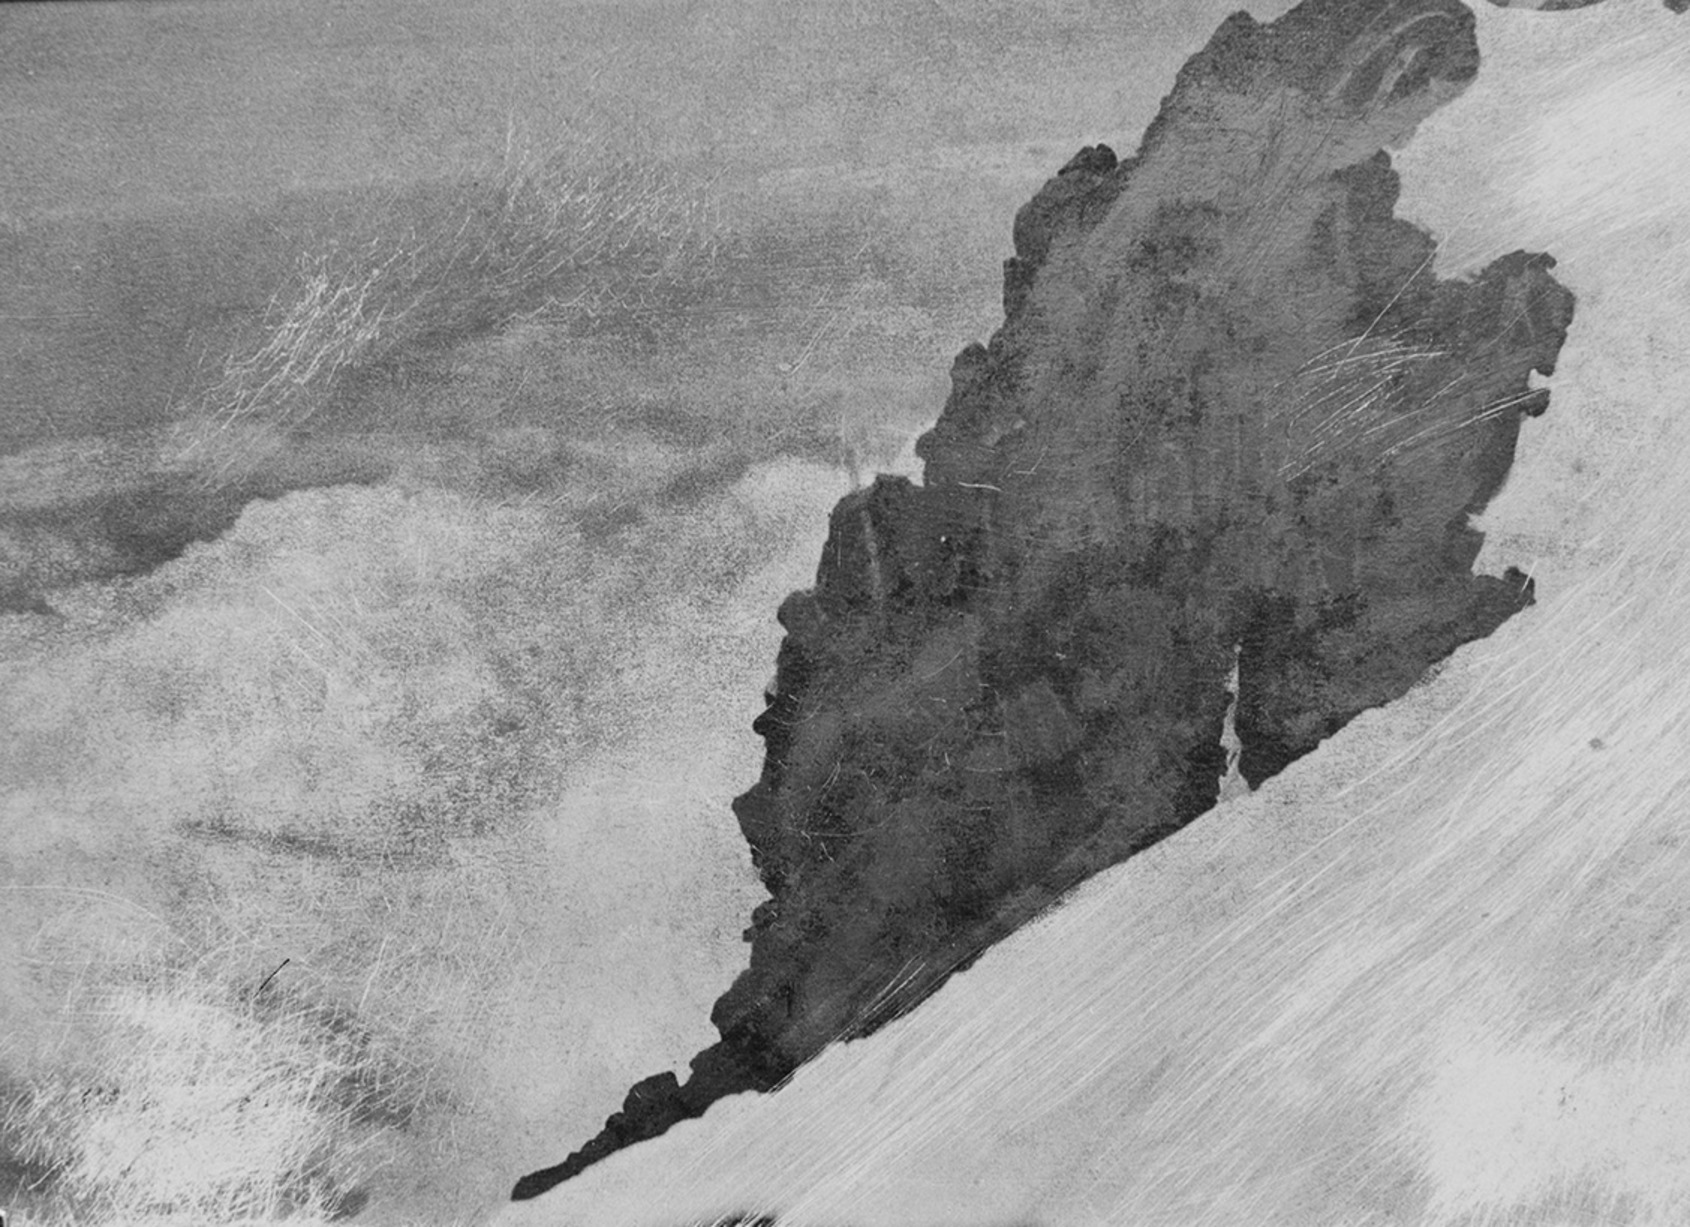 Mountain and Snow 71-07, Jean Claude Wouters, 2007, 117×161. On llford mat baryte paper,with sistan silver lmage stabilizer treatment. Courtesy of artist. 